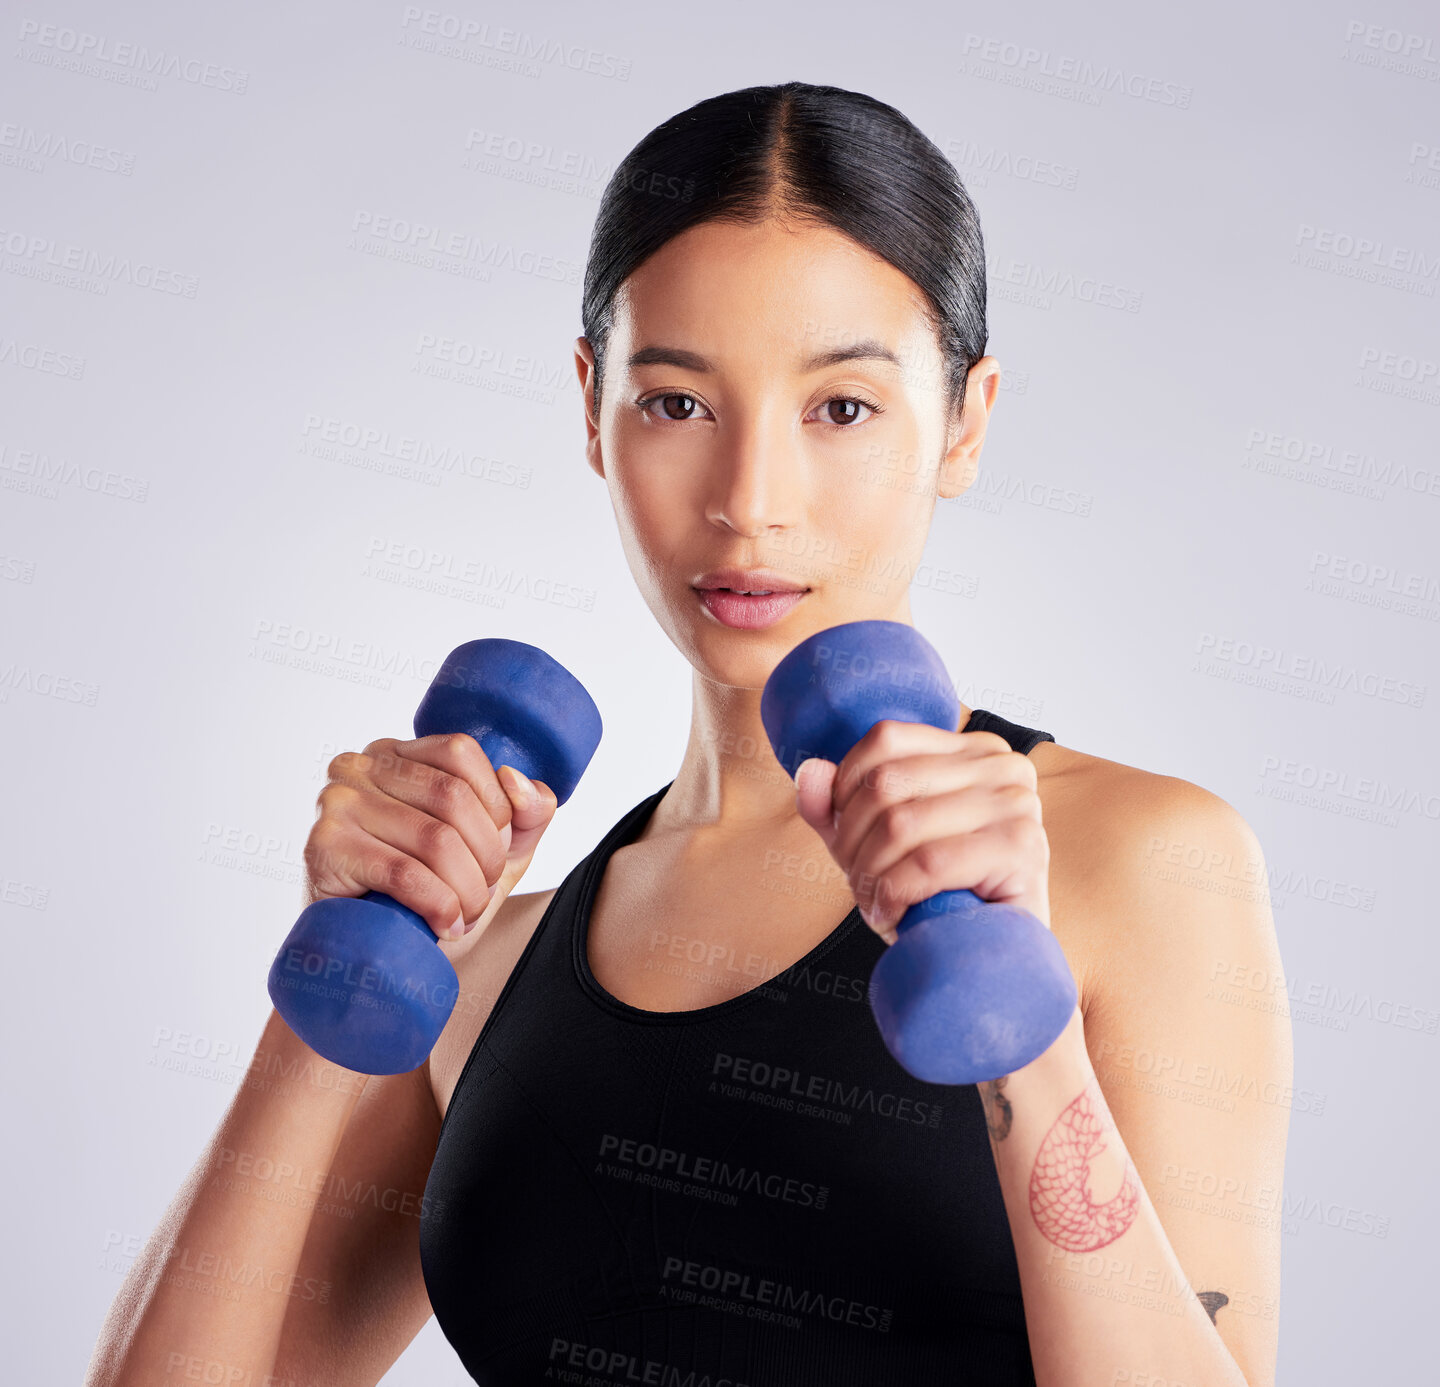 Buy stock photo Shot of an attractive young woman standing and posing with dumbbells during her workout